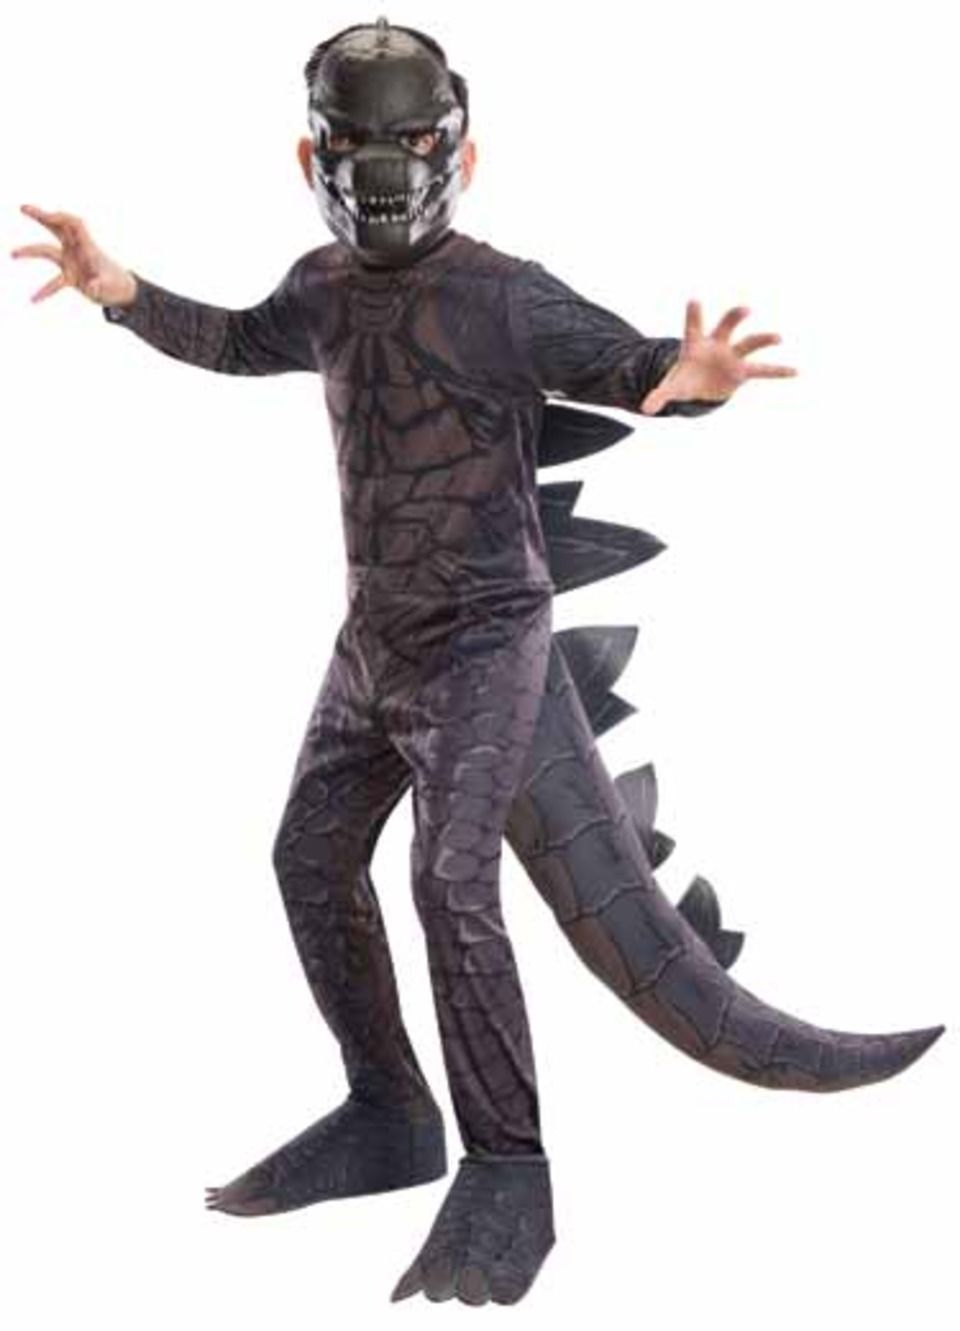 Godzilla Child Costume w/ Stuffable Tail for 3D Effect - Click Image to Close